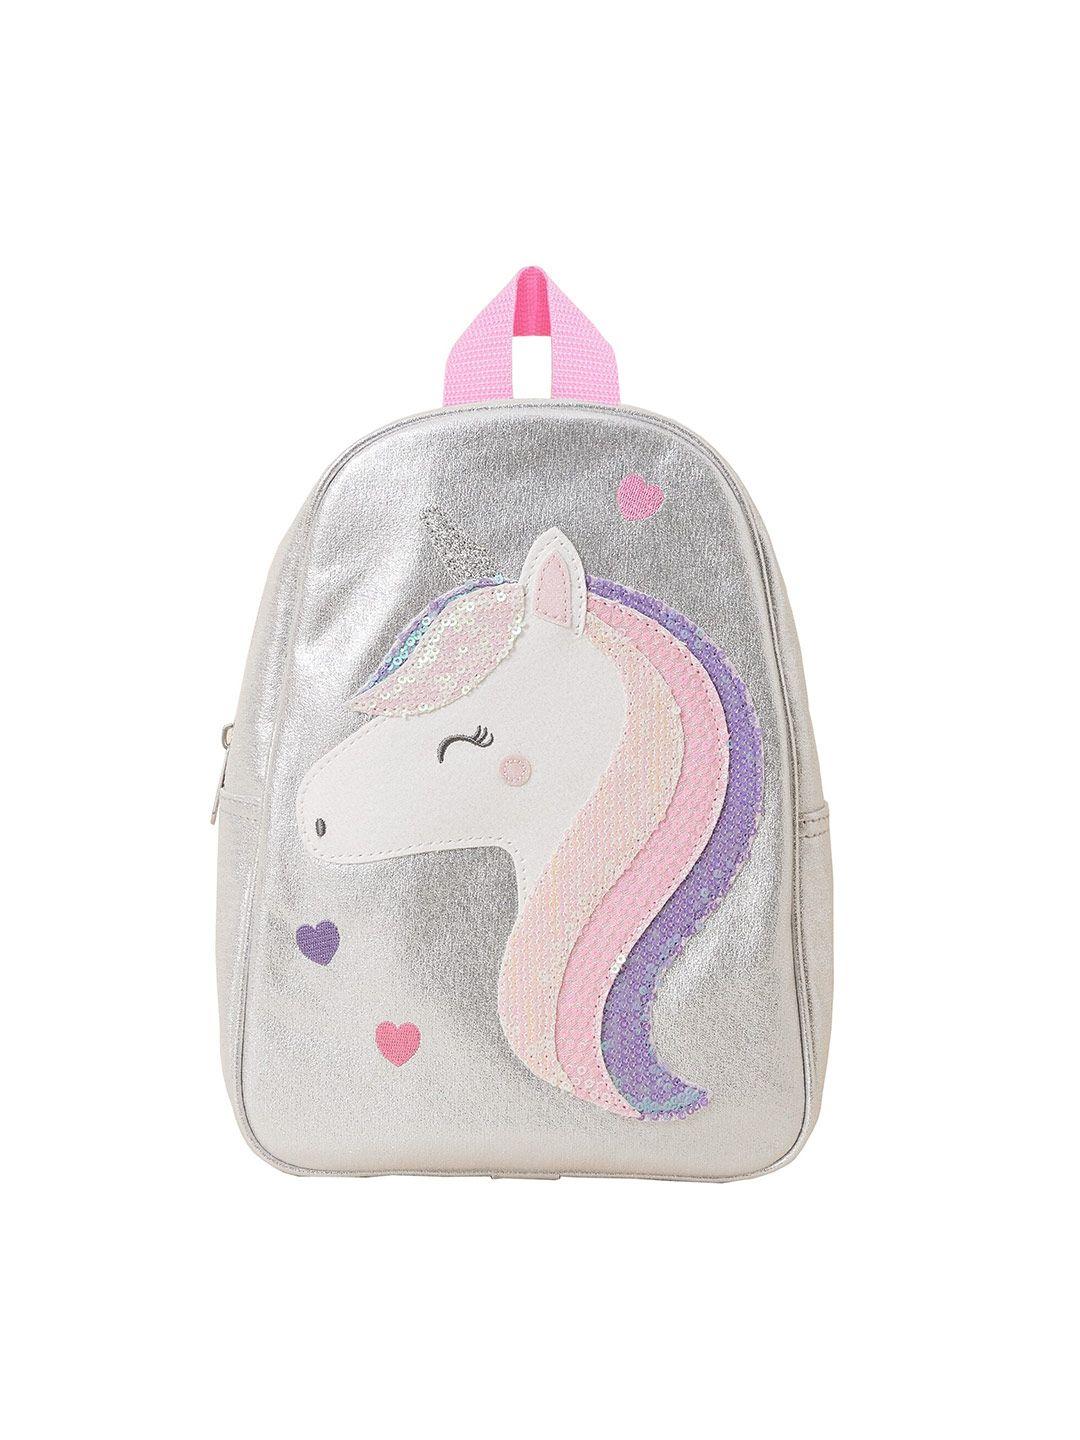 accessorize girls printed backpack